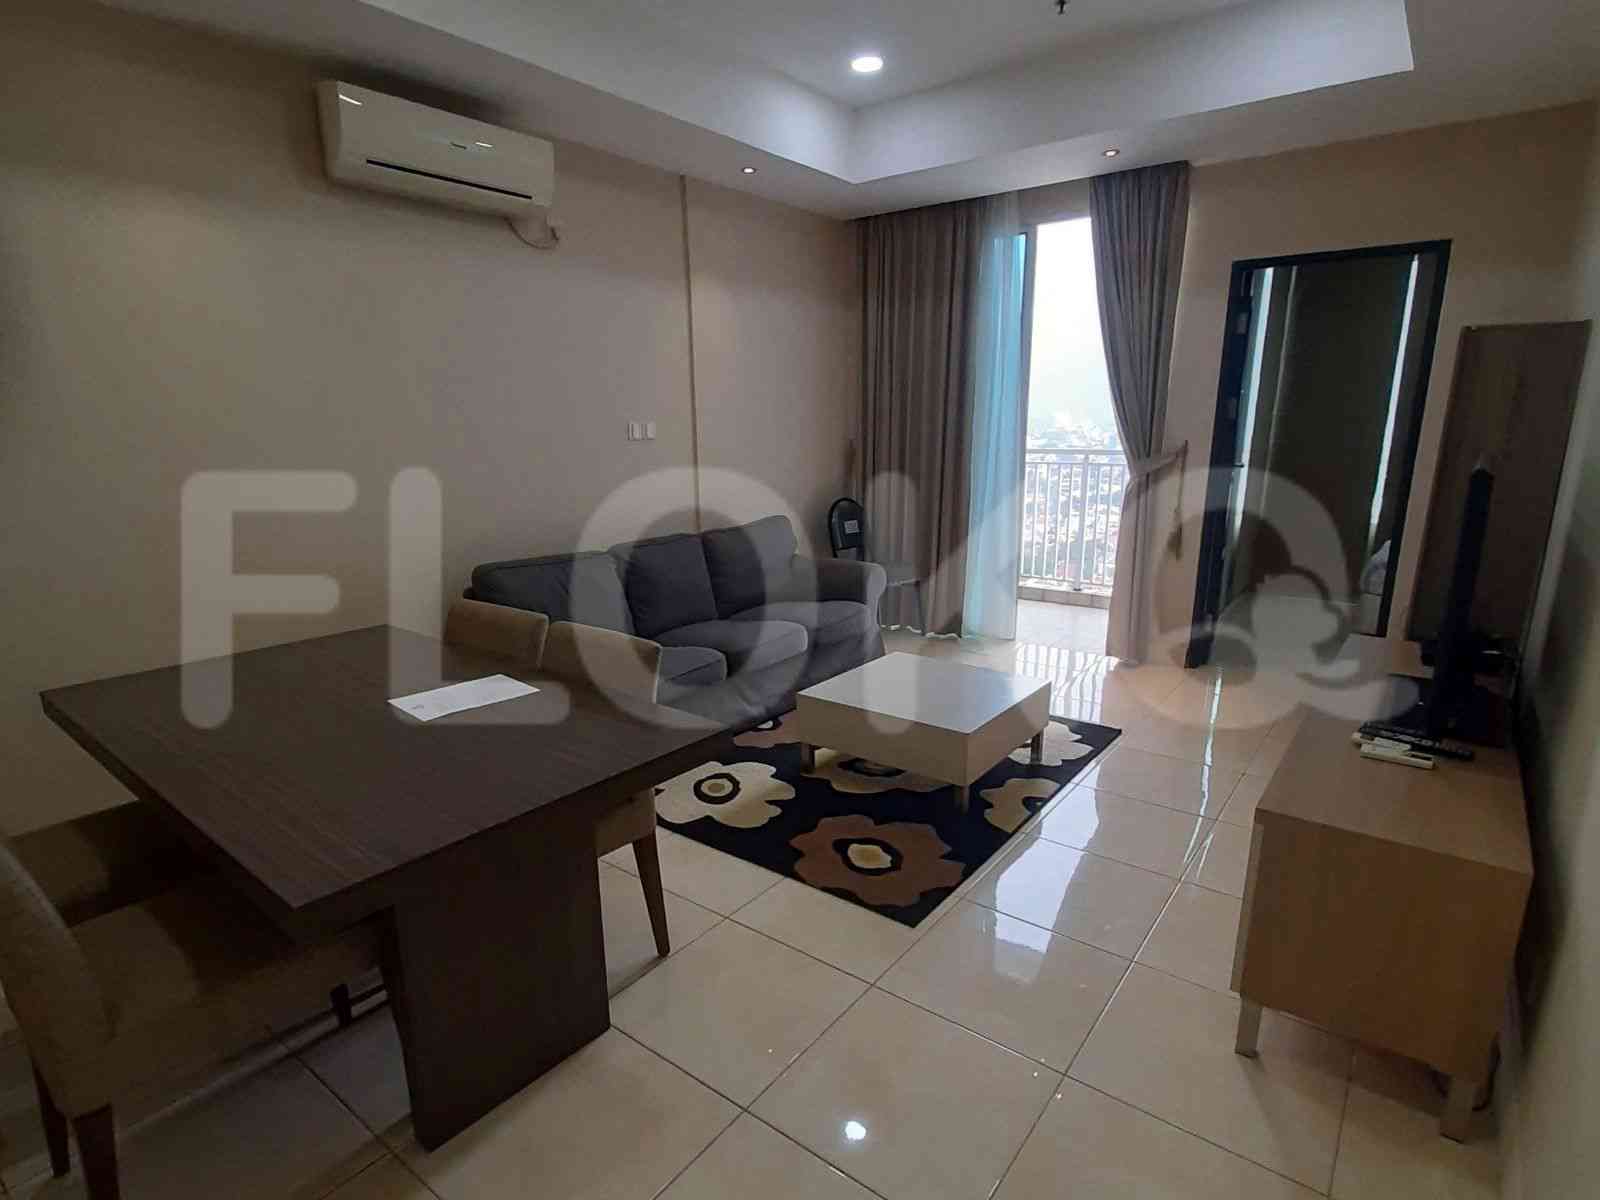 2 Bedroom on 15th Floor for Rent in Essence Darmawangsa Apartment - fci112 2